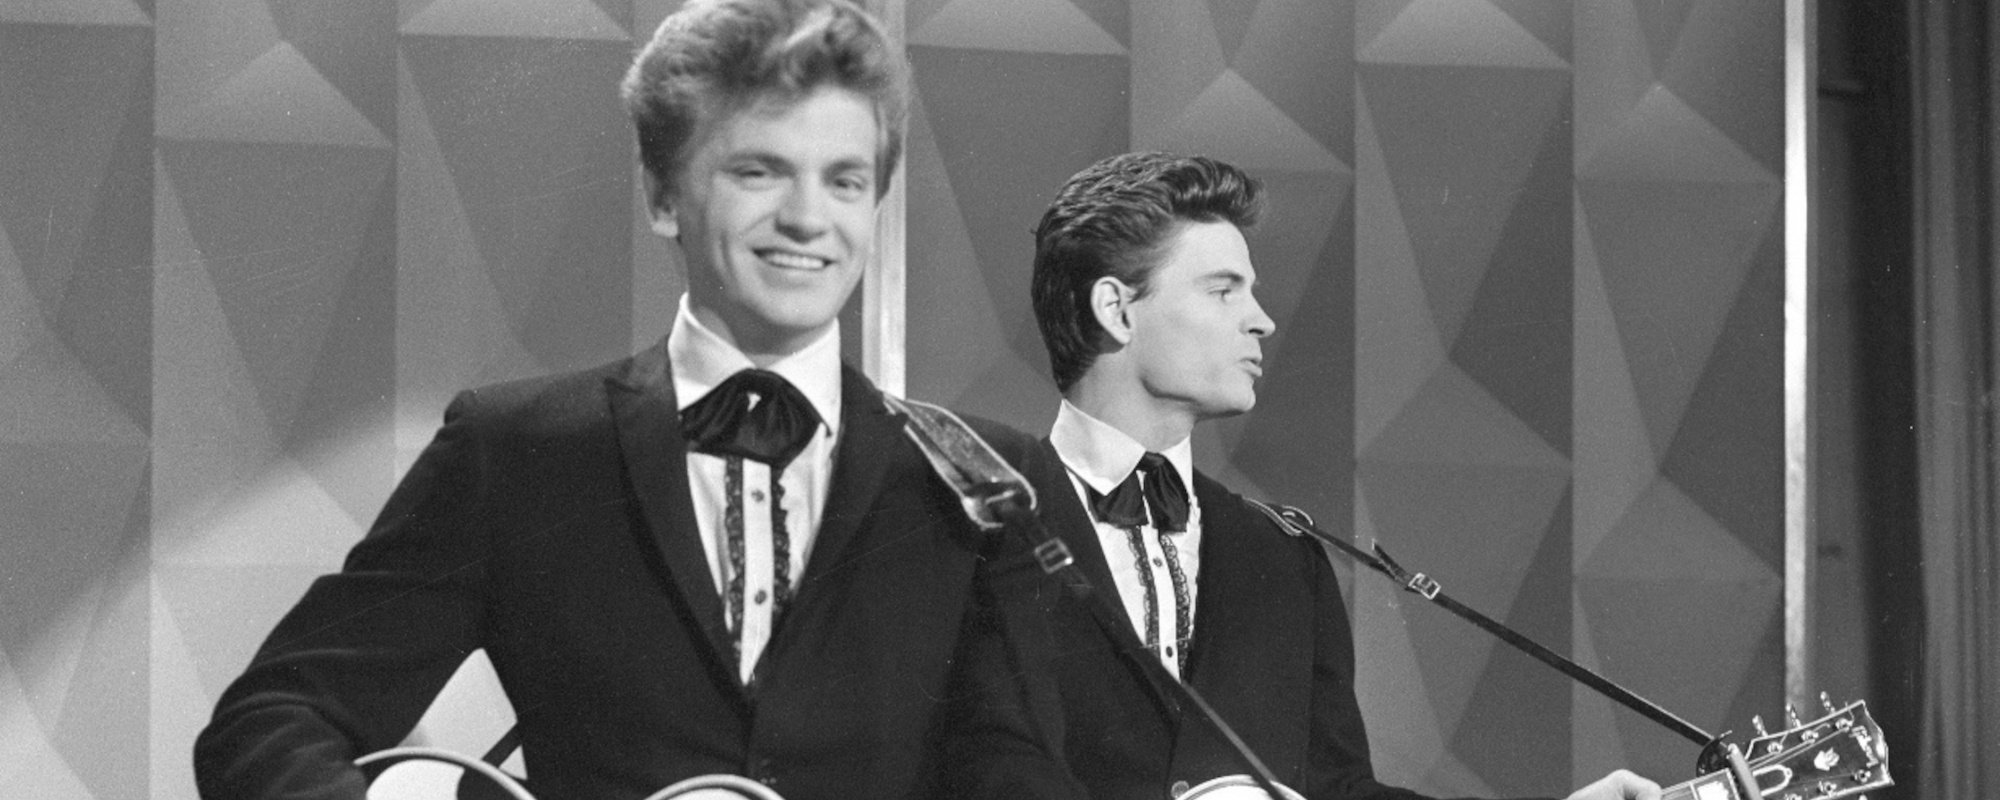 The Everly Brothers Remembered: Limited Edition Gibson Guitar & New Compilation Album Set for Release